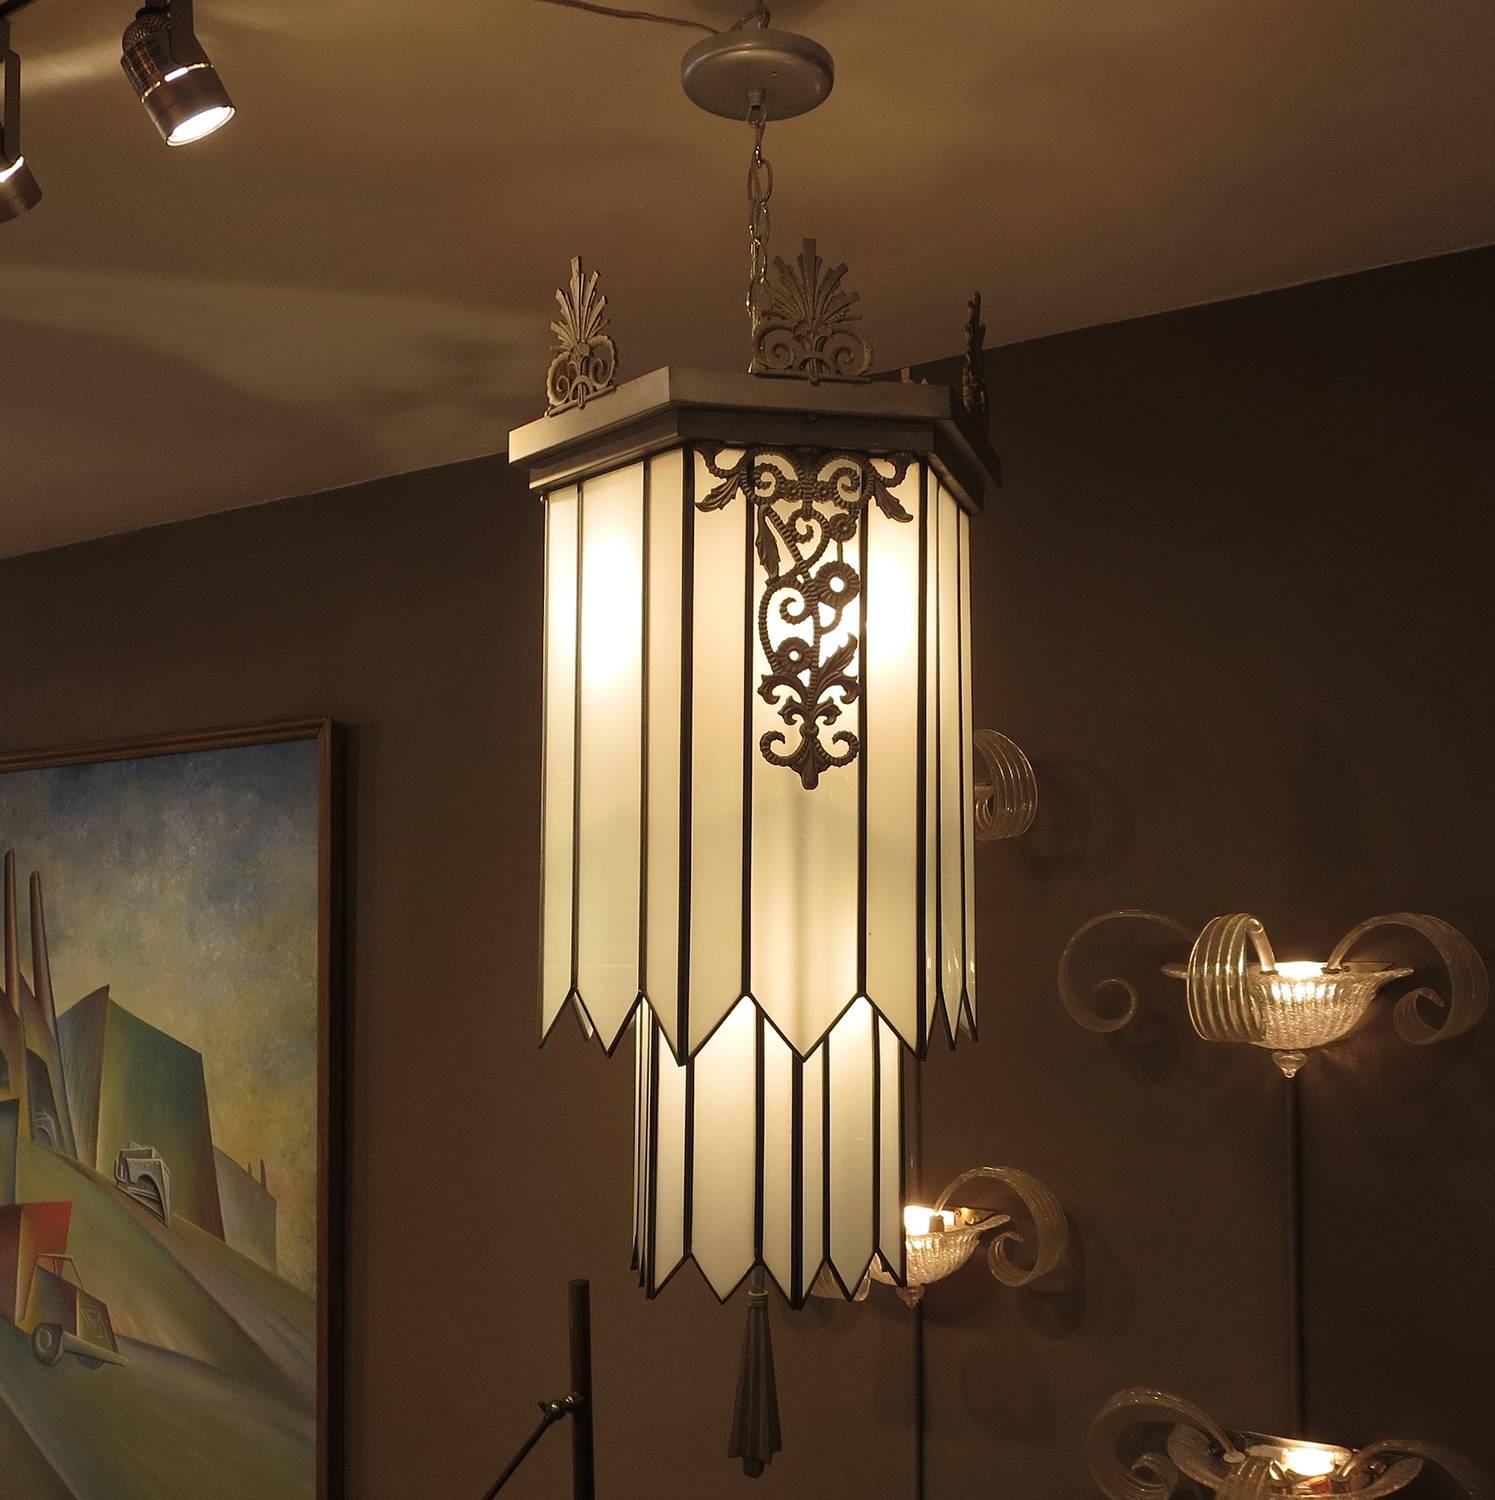 When one thinks back to the 1930s Great Depression, the movie palaces built in the day were escapes of fantasy and opulence. The Art Deco interiors were ultra-glamorous and transported the average person from difficult times. This chandelier is